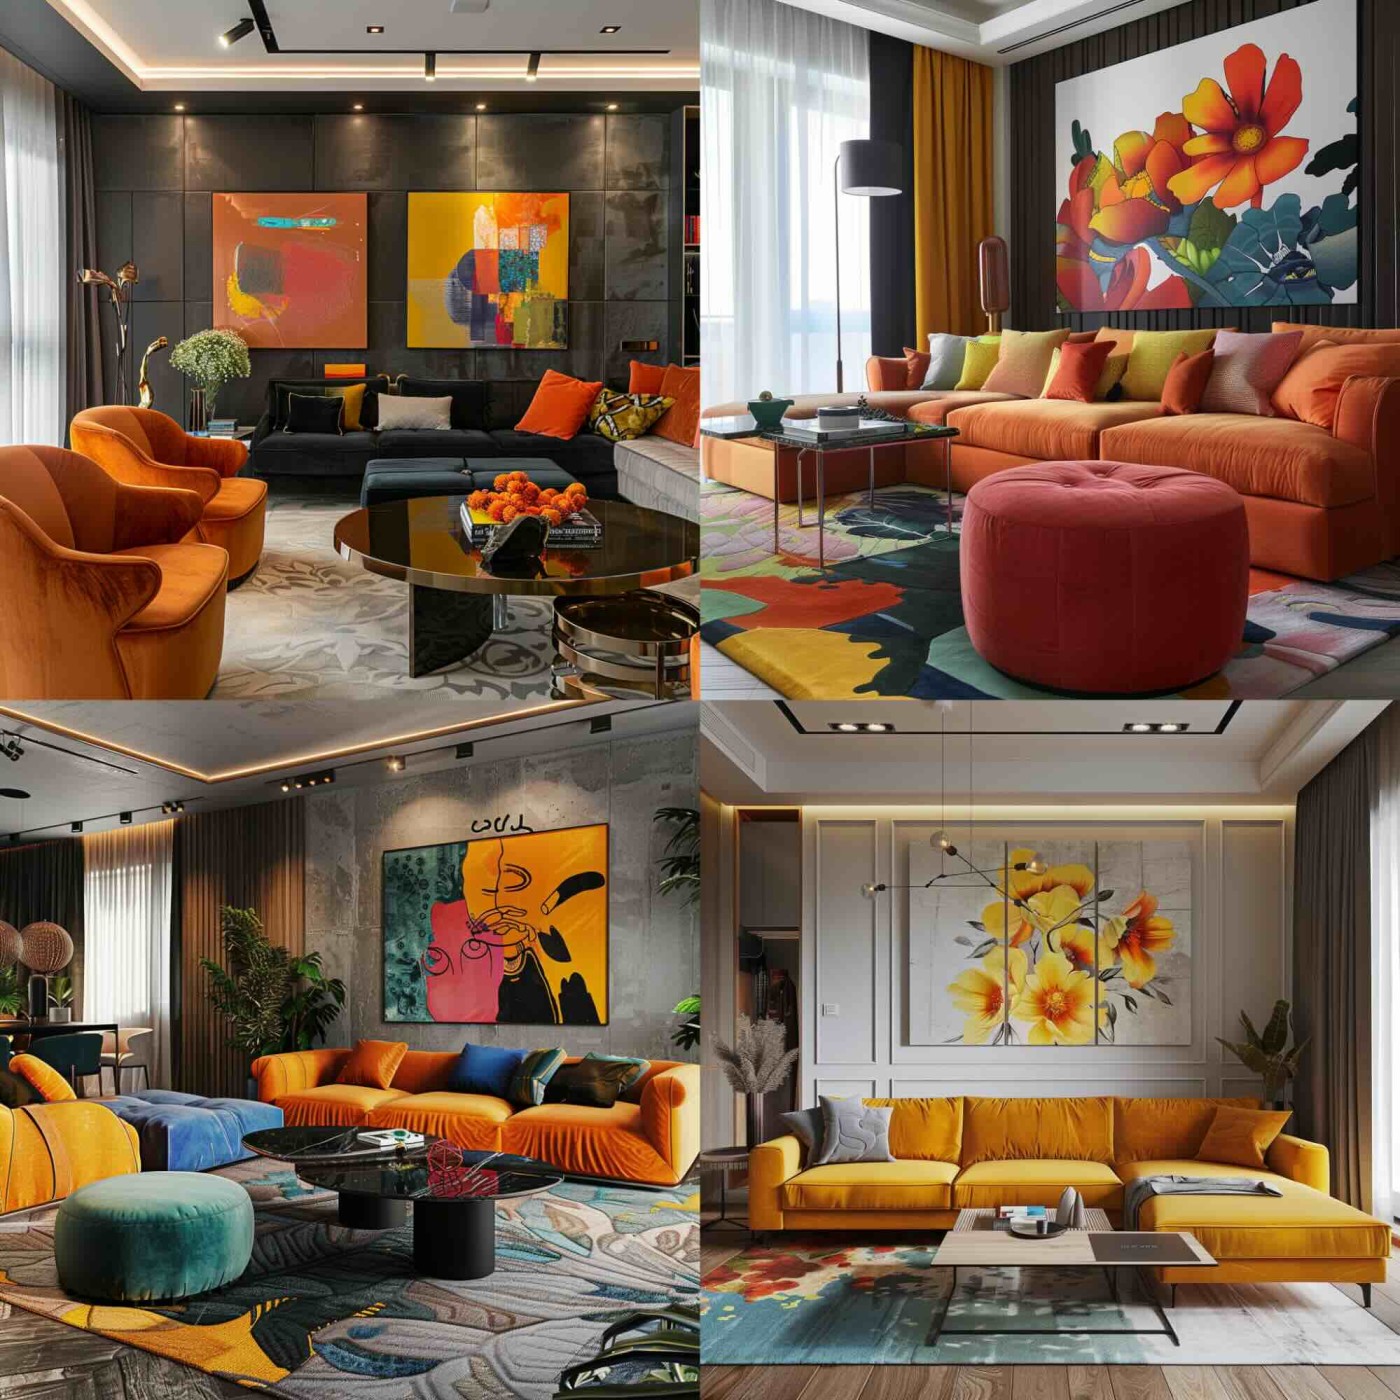 A living room in a luxury apartment, vibrant